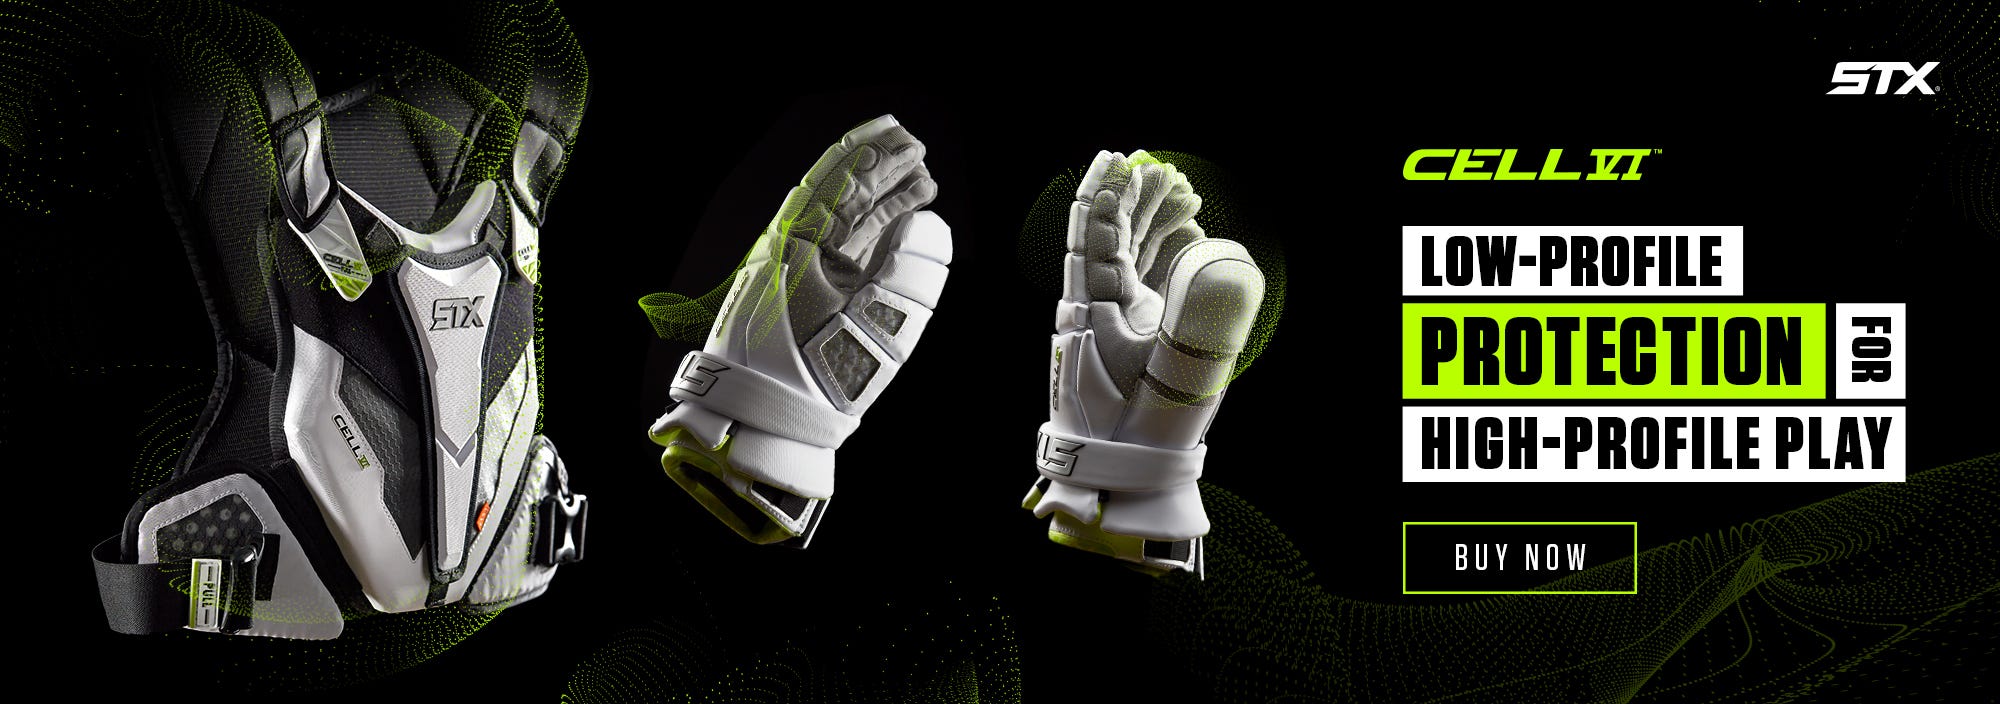 STX Cell VI Gloves & Pads: Low-profile protection for high-profile play